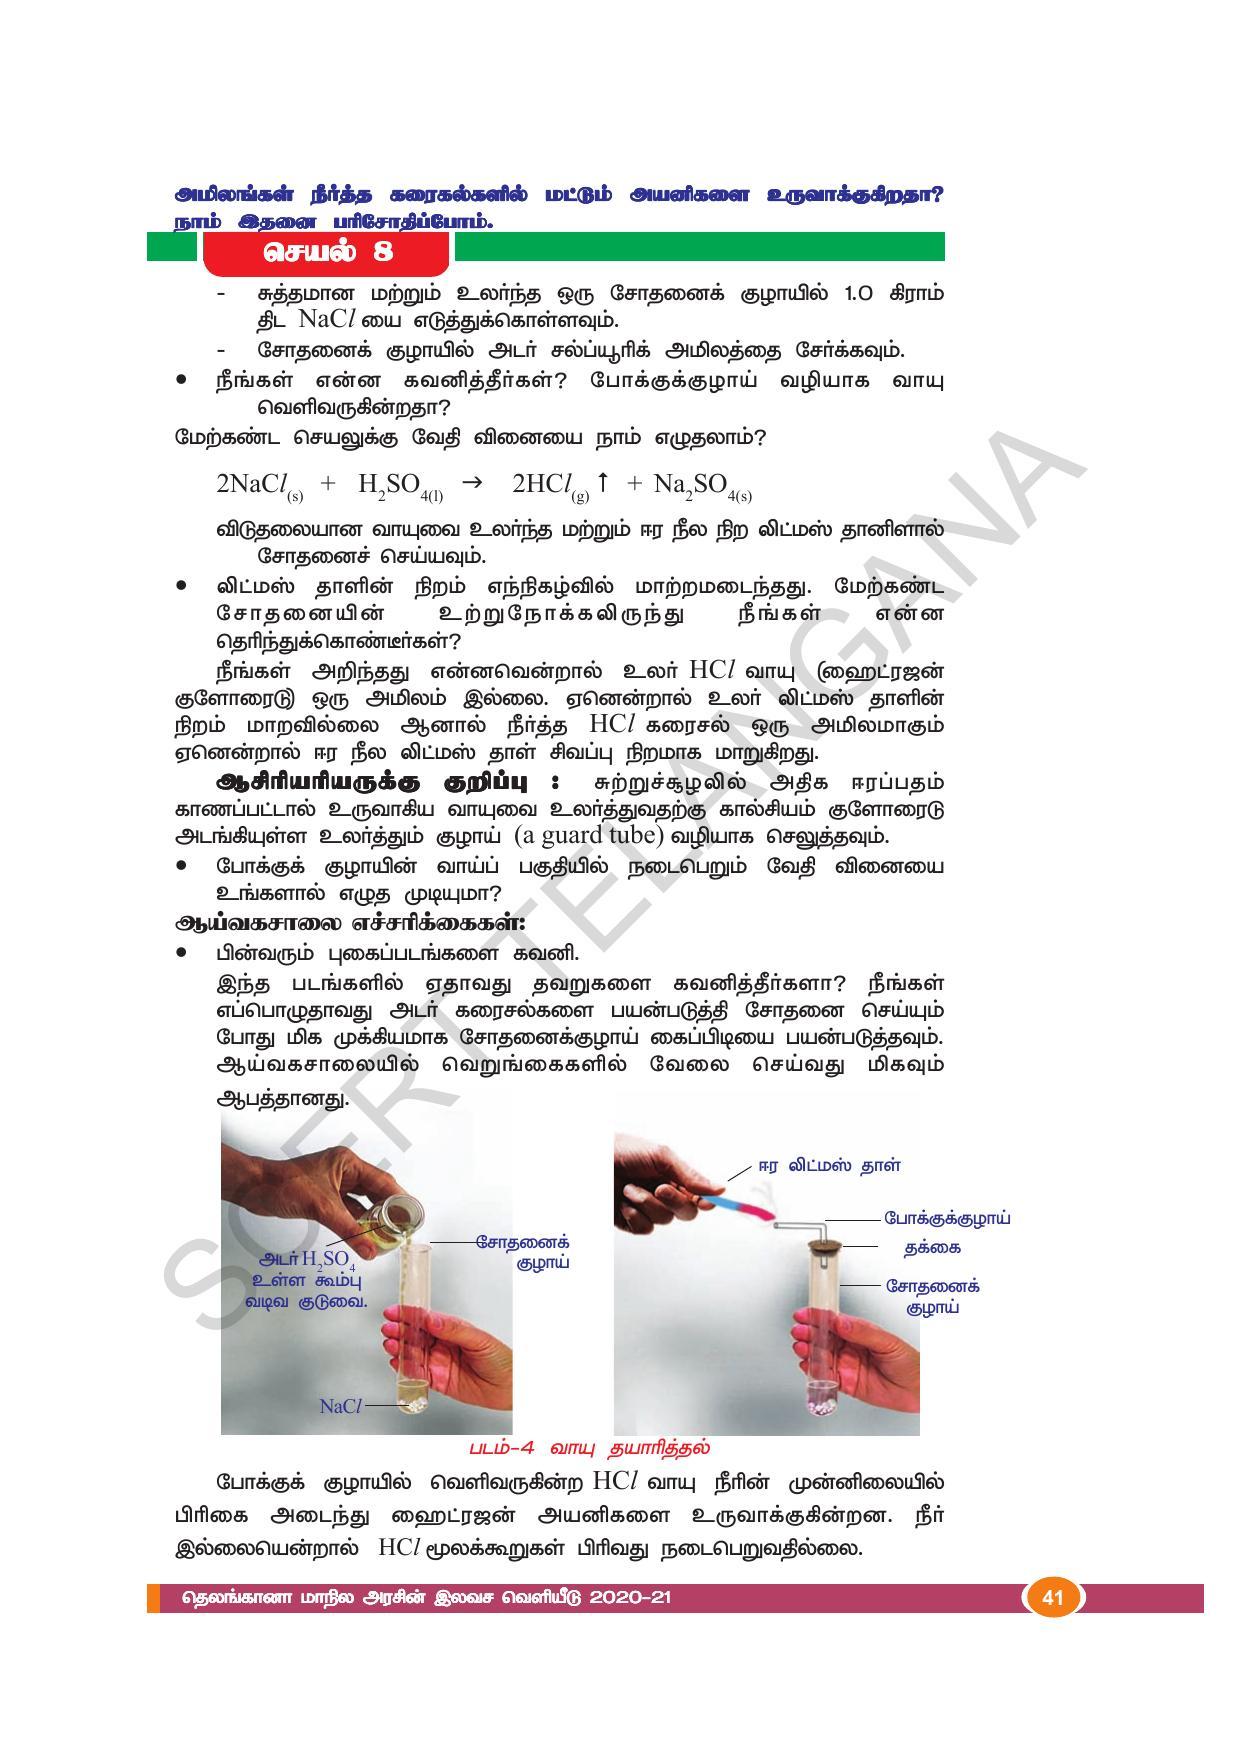 TS SCERT Class 10 Physical Science(Tamil Medium) Text Book - Page 53